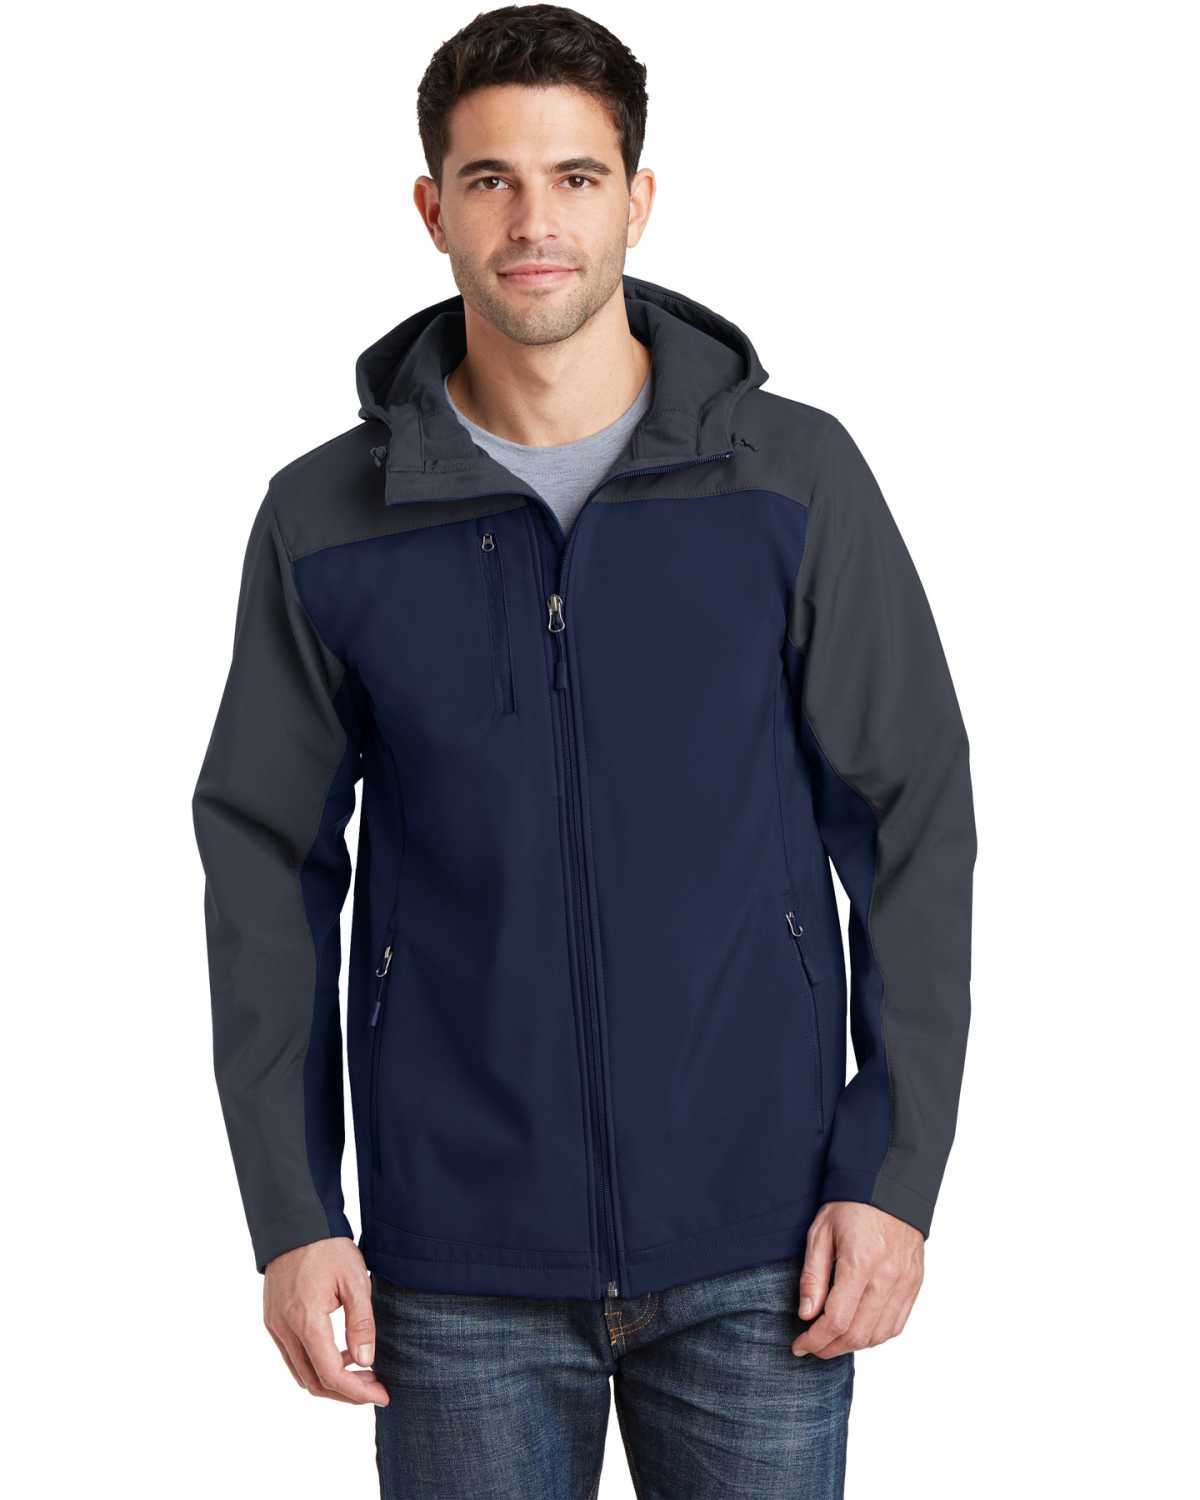 Port Authority J335 Hooded Core Soft Shell Jacket on discount ...